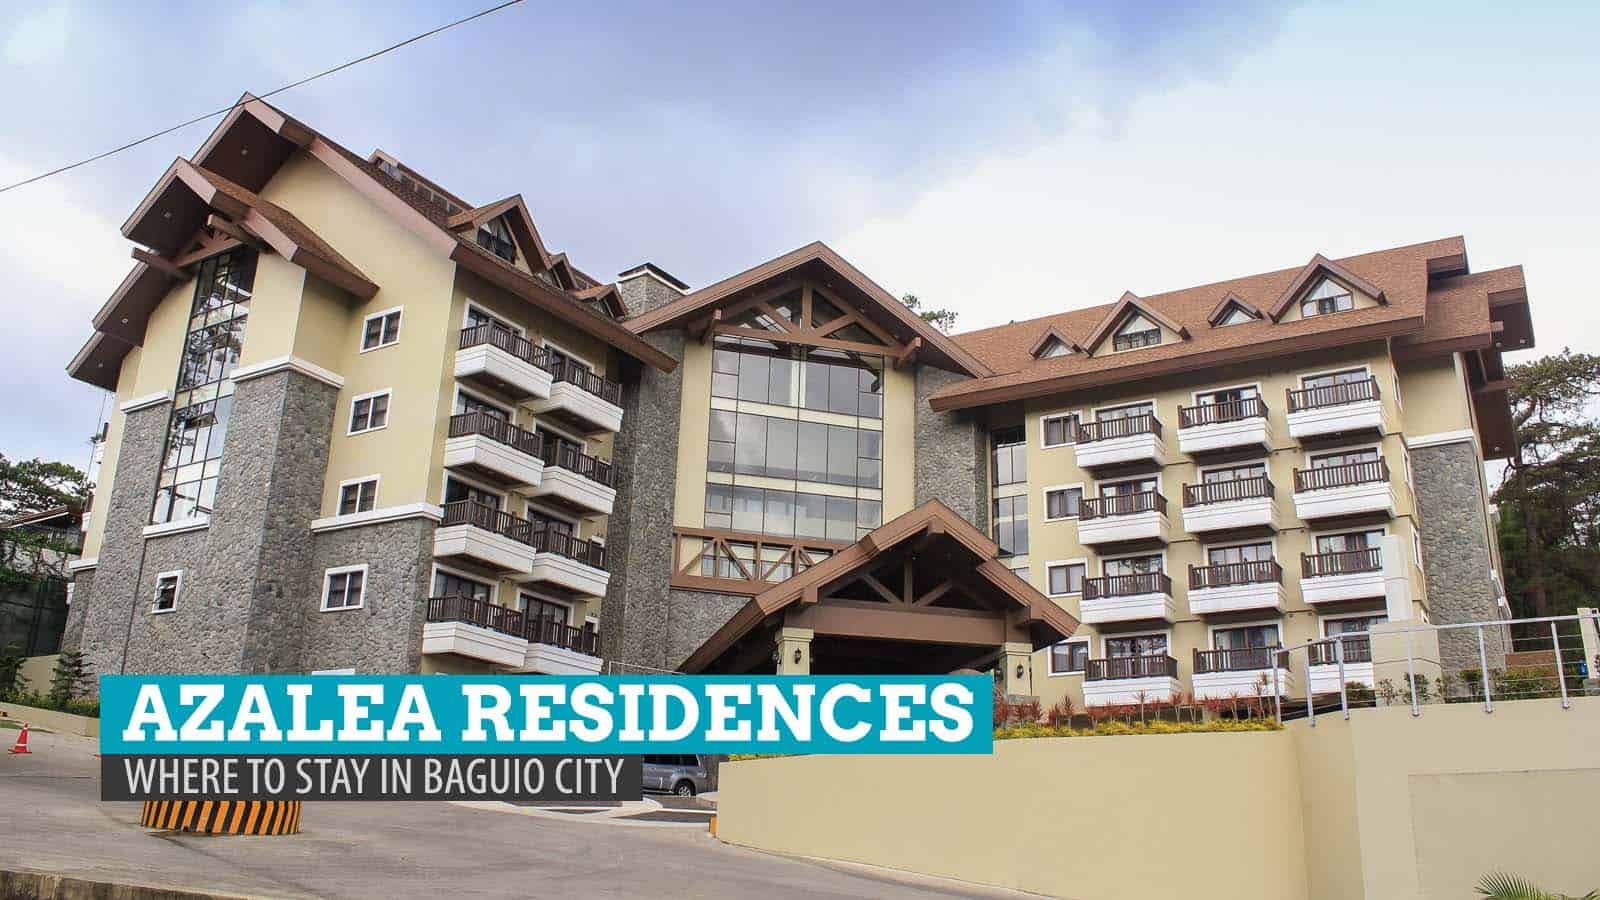 Azalea Hotels and Residences: Where to Stay in Baguio City, Philippines